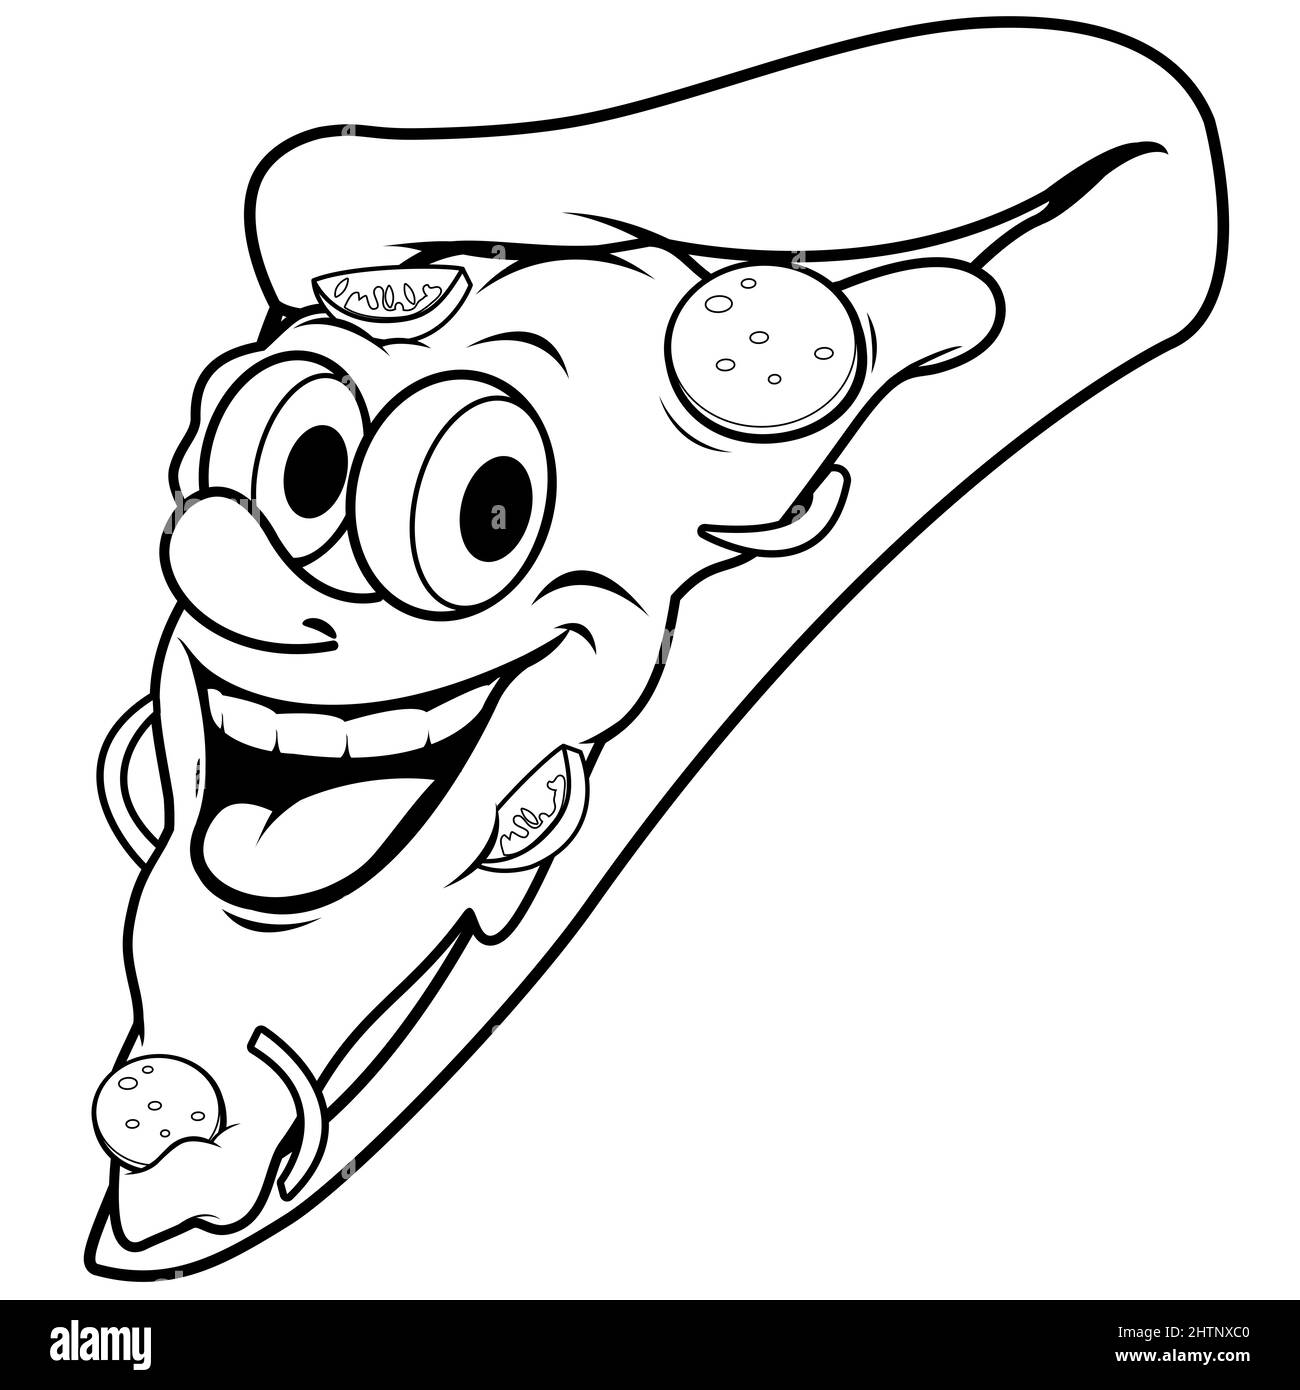 Cartoon pizza slice character. Back and white coloring page Stock Photo